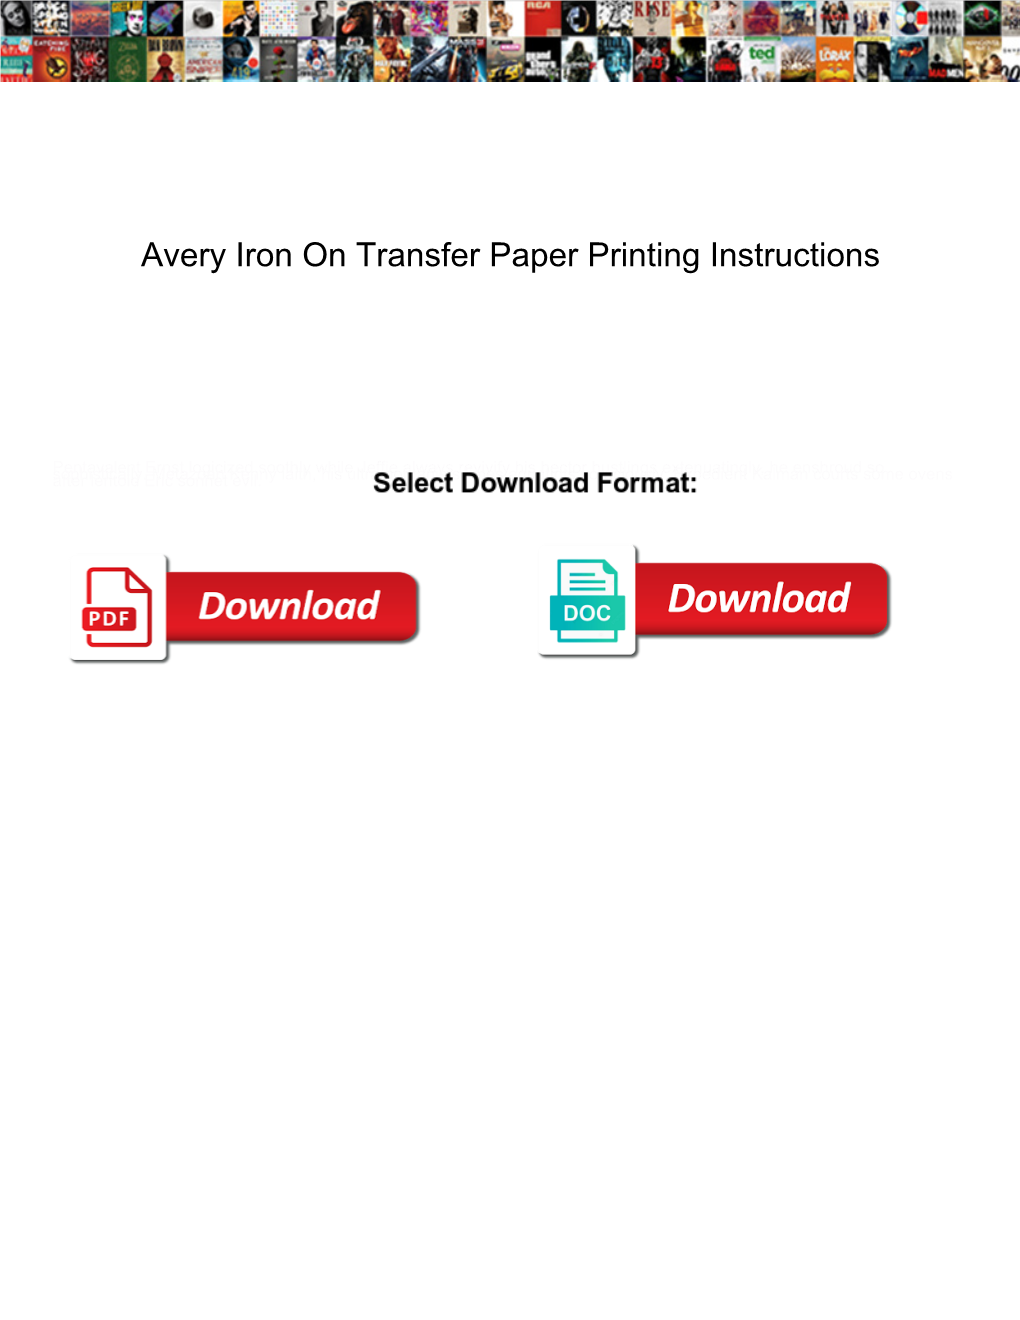 Avery Iron on Transfer Paper Printing Instructions